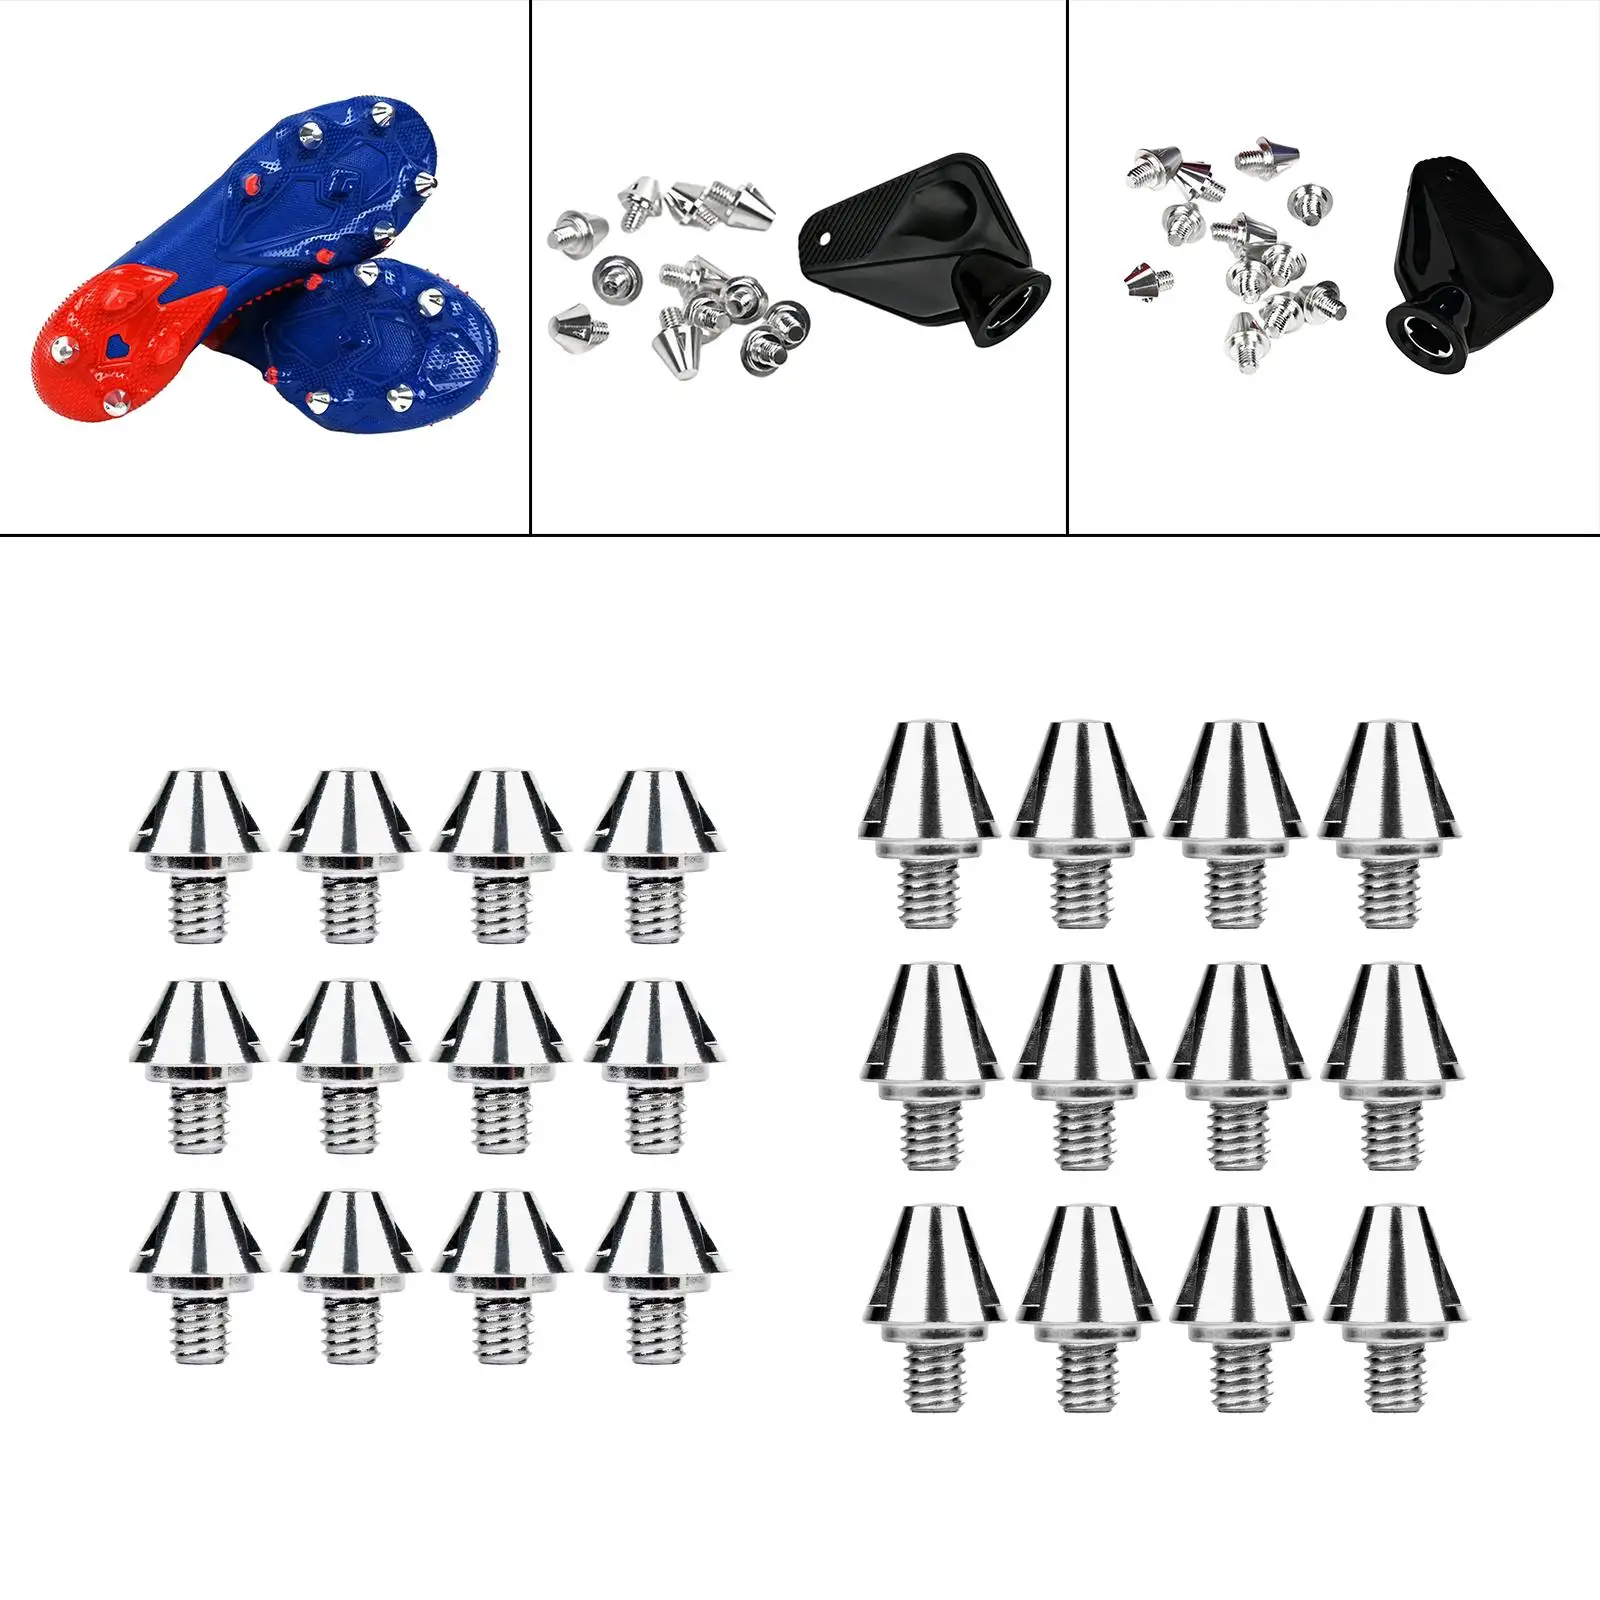 12x Football Shoe Spikes Thread Screw 6mm Dia Stable Soccer Boot Cleats for Athletic Sneakers Competition Indoor Outdoor Sports